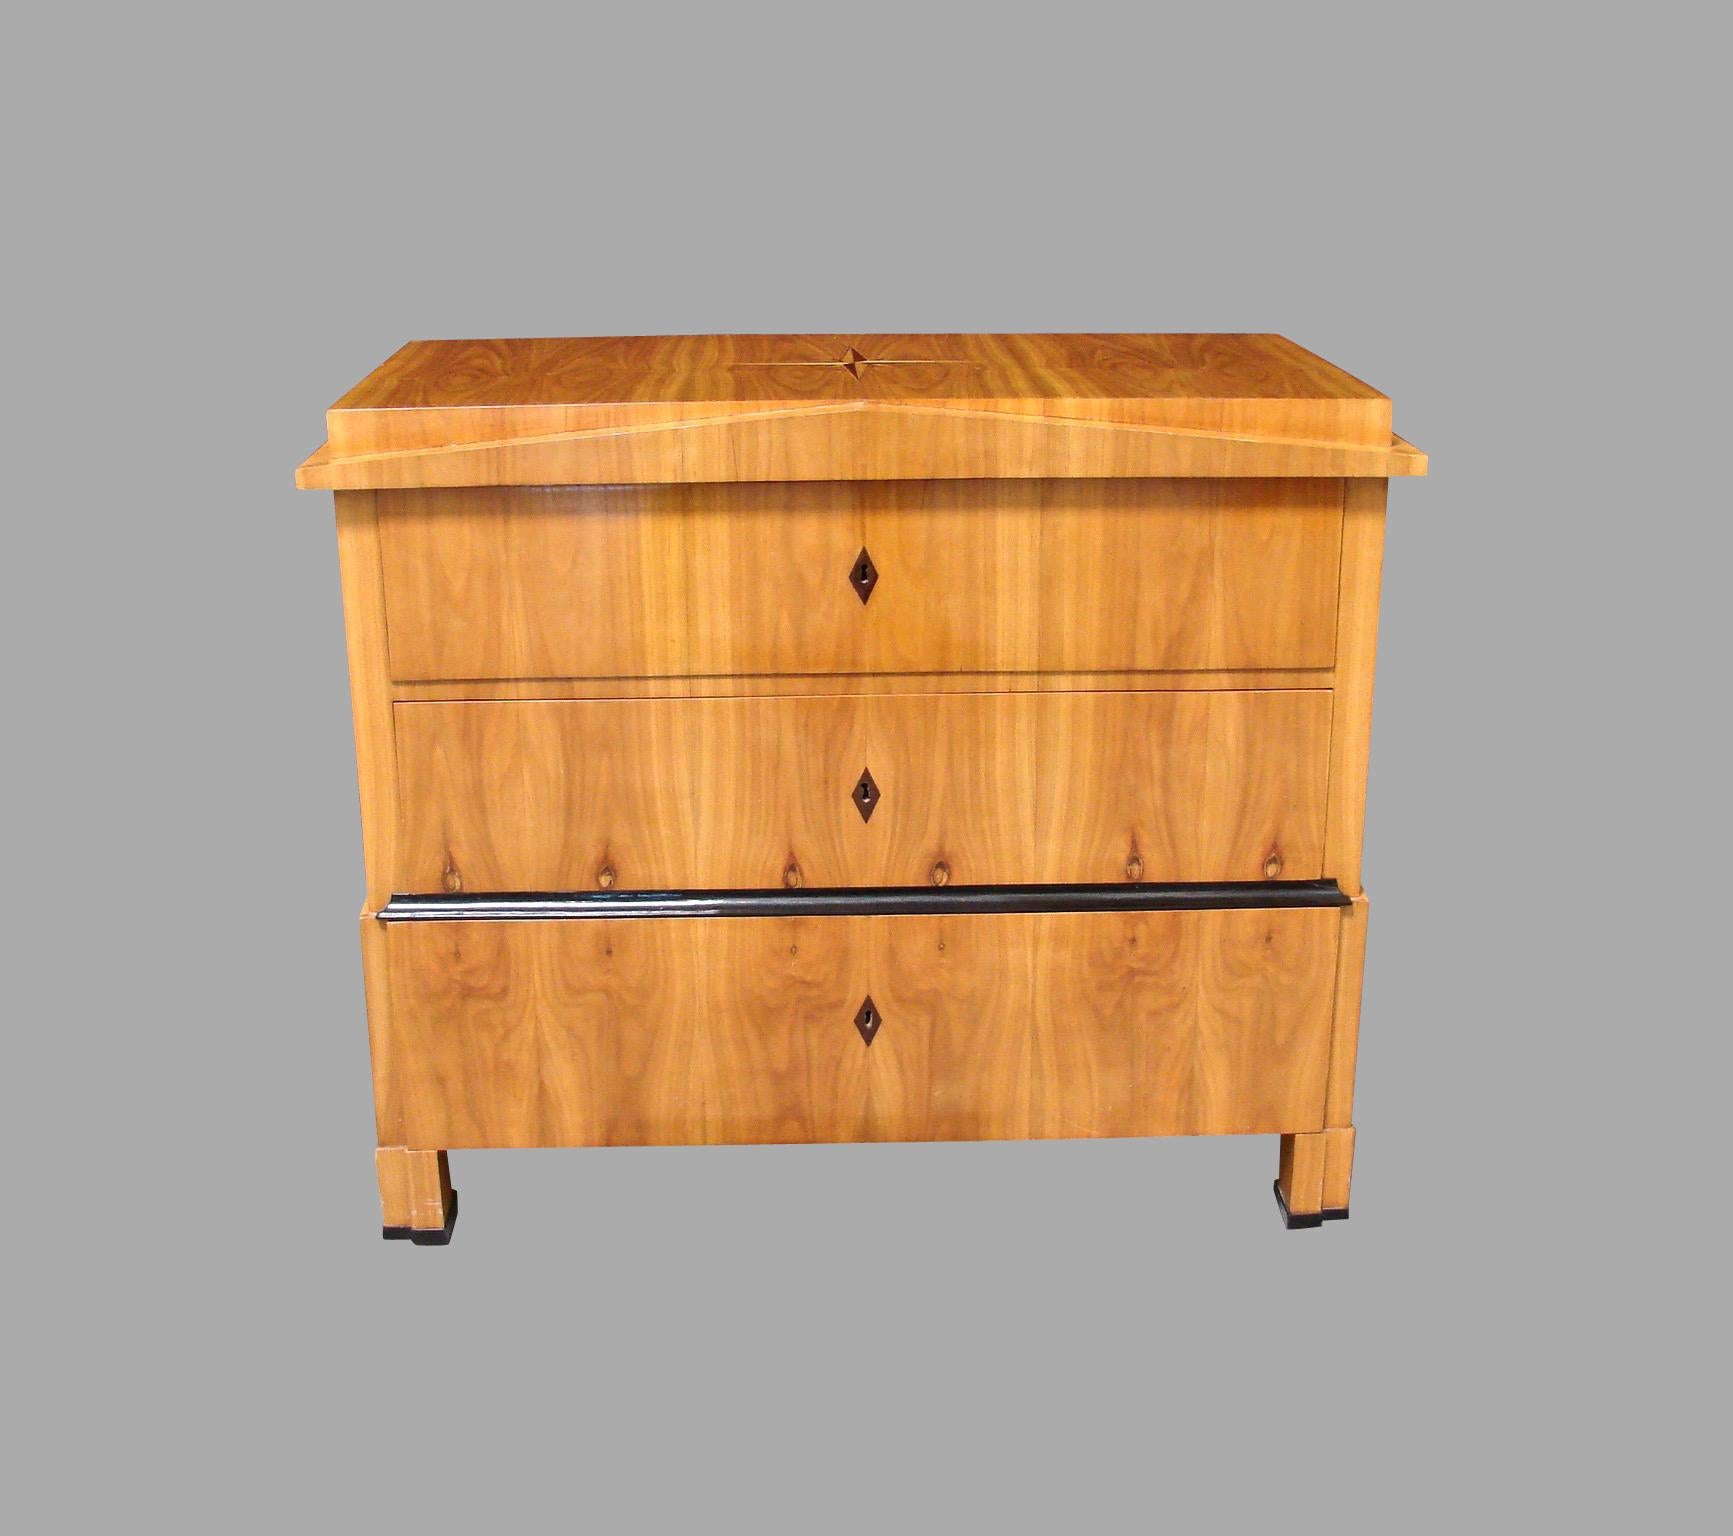 A fine inlaid Austrian pearwood or fruitwood Biedermeier commode of architectural form, the top inlaid with a compass star, the front with a triangular pediment above 3 long drawers with ebonized keyhole escutcheons supported on block feet with